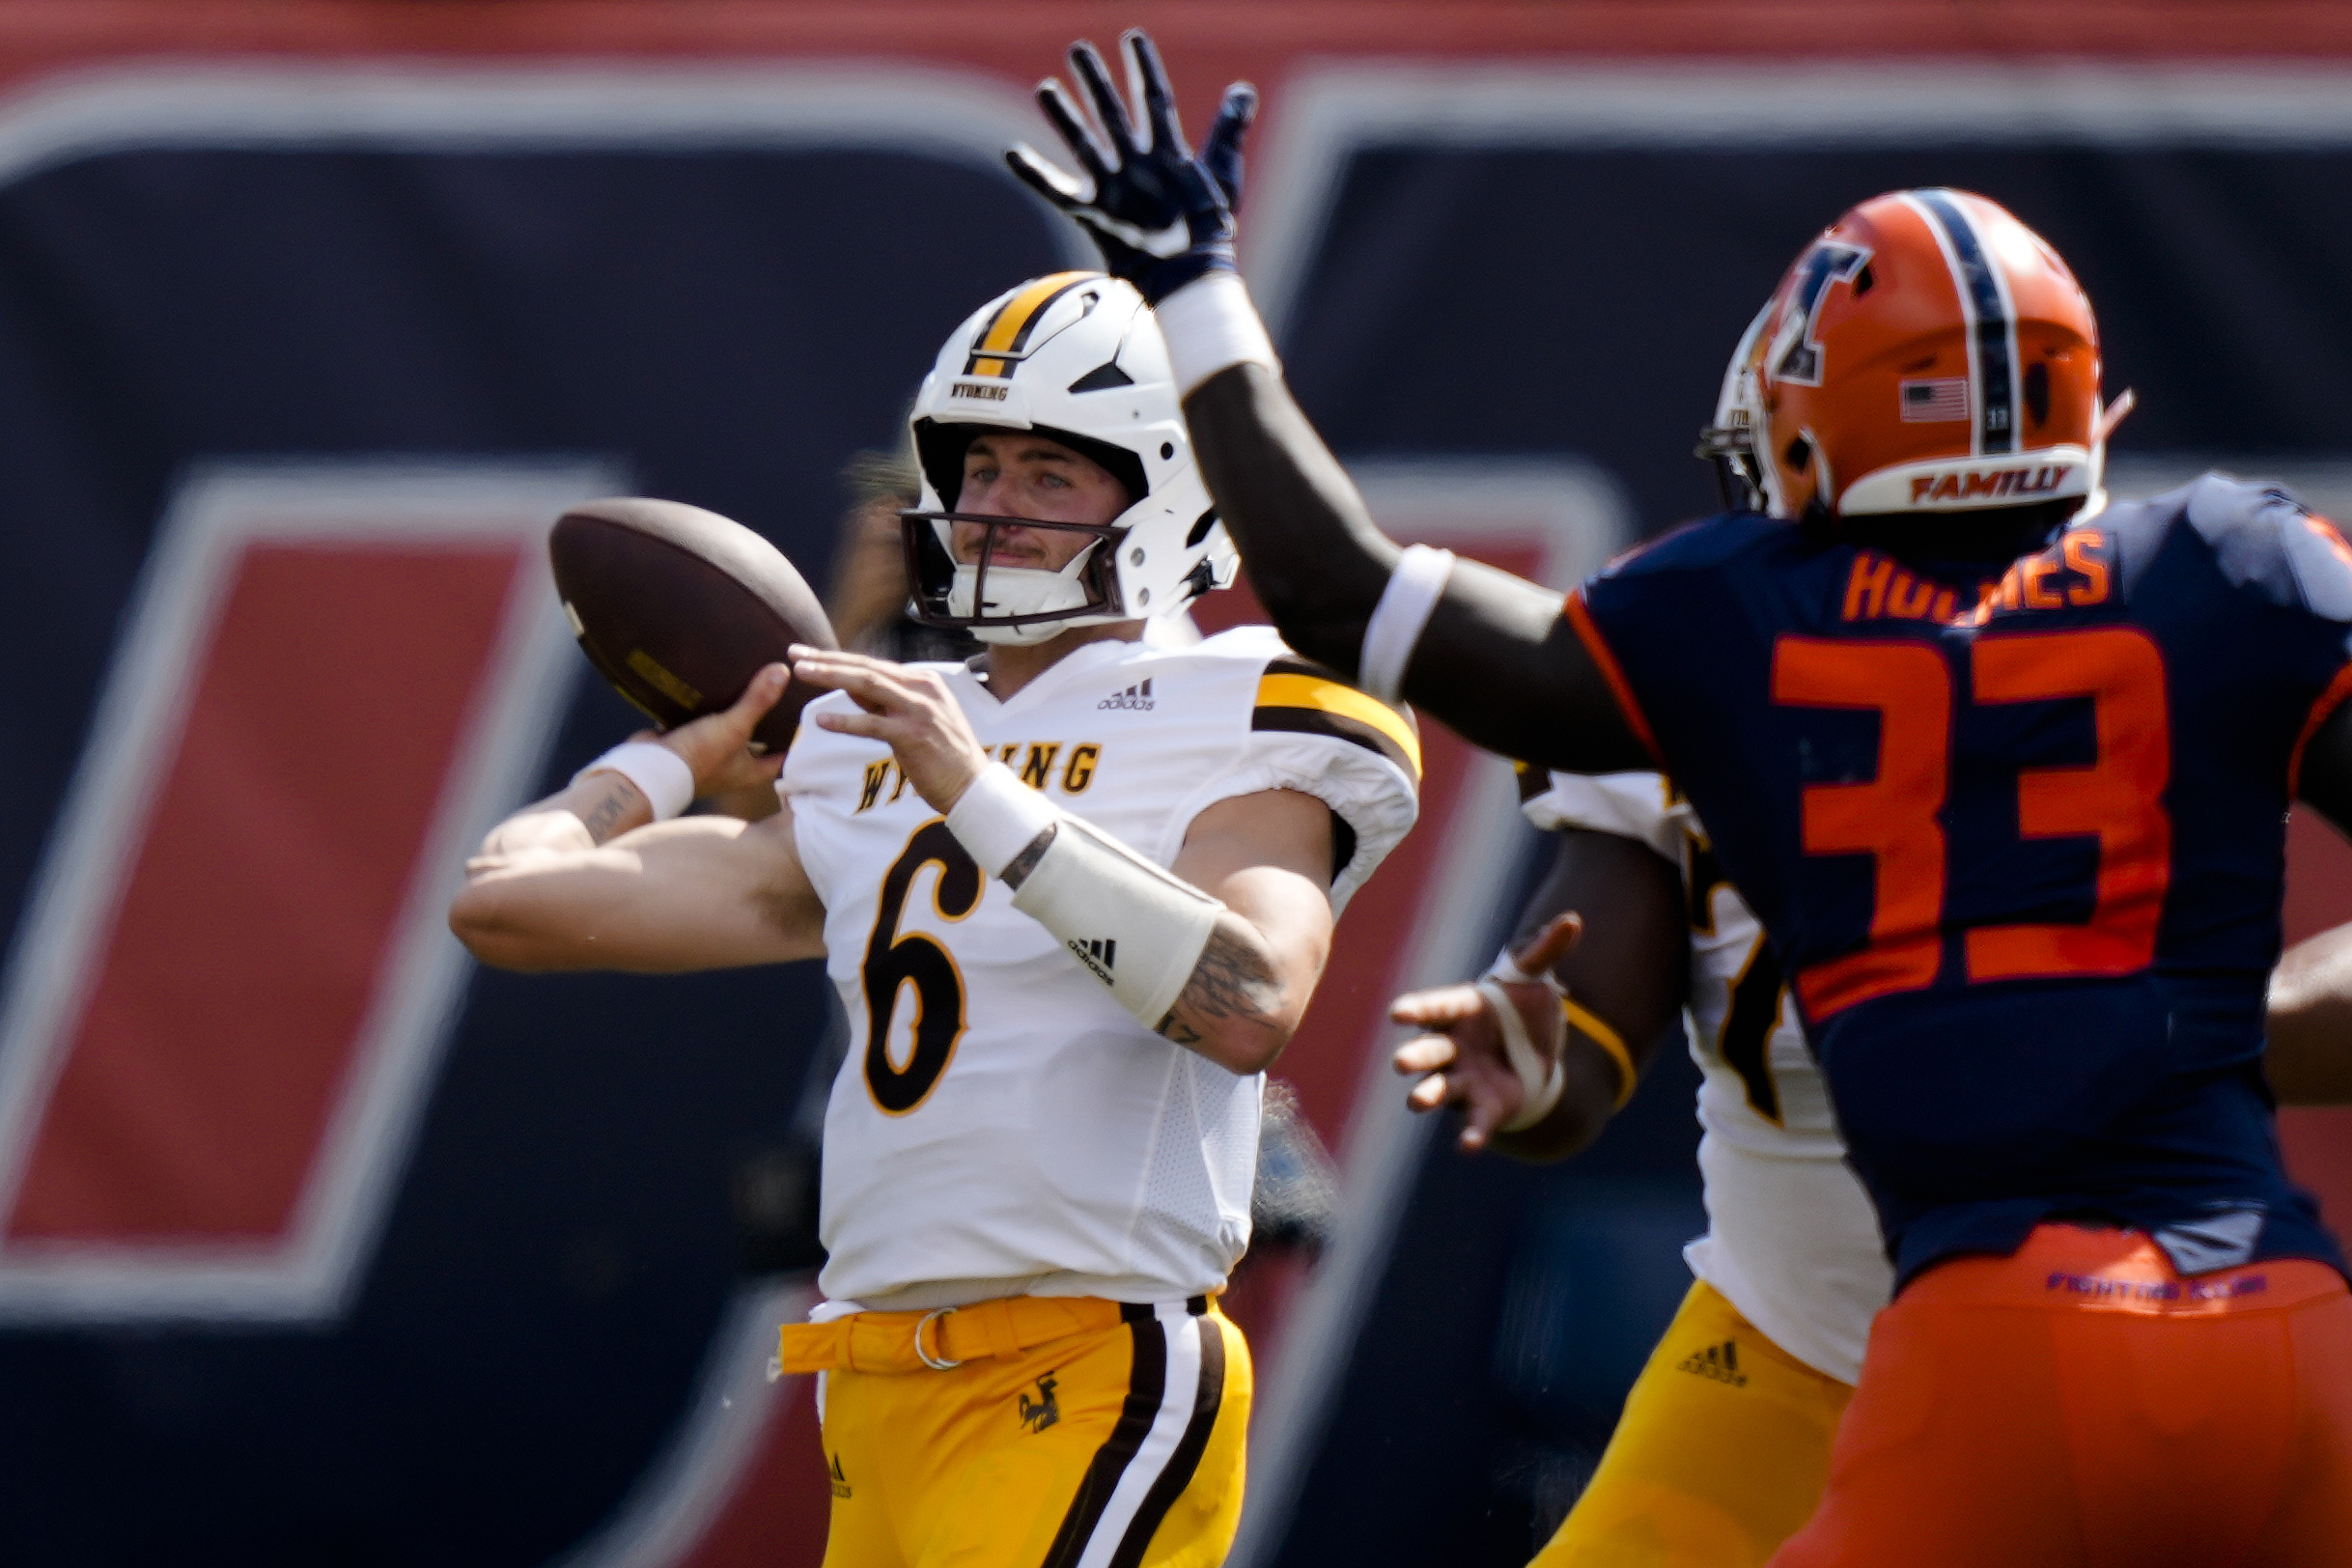 Wyoming Football: First Look at the Illinois Fighting Illini